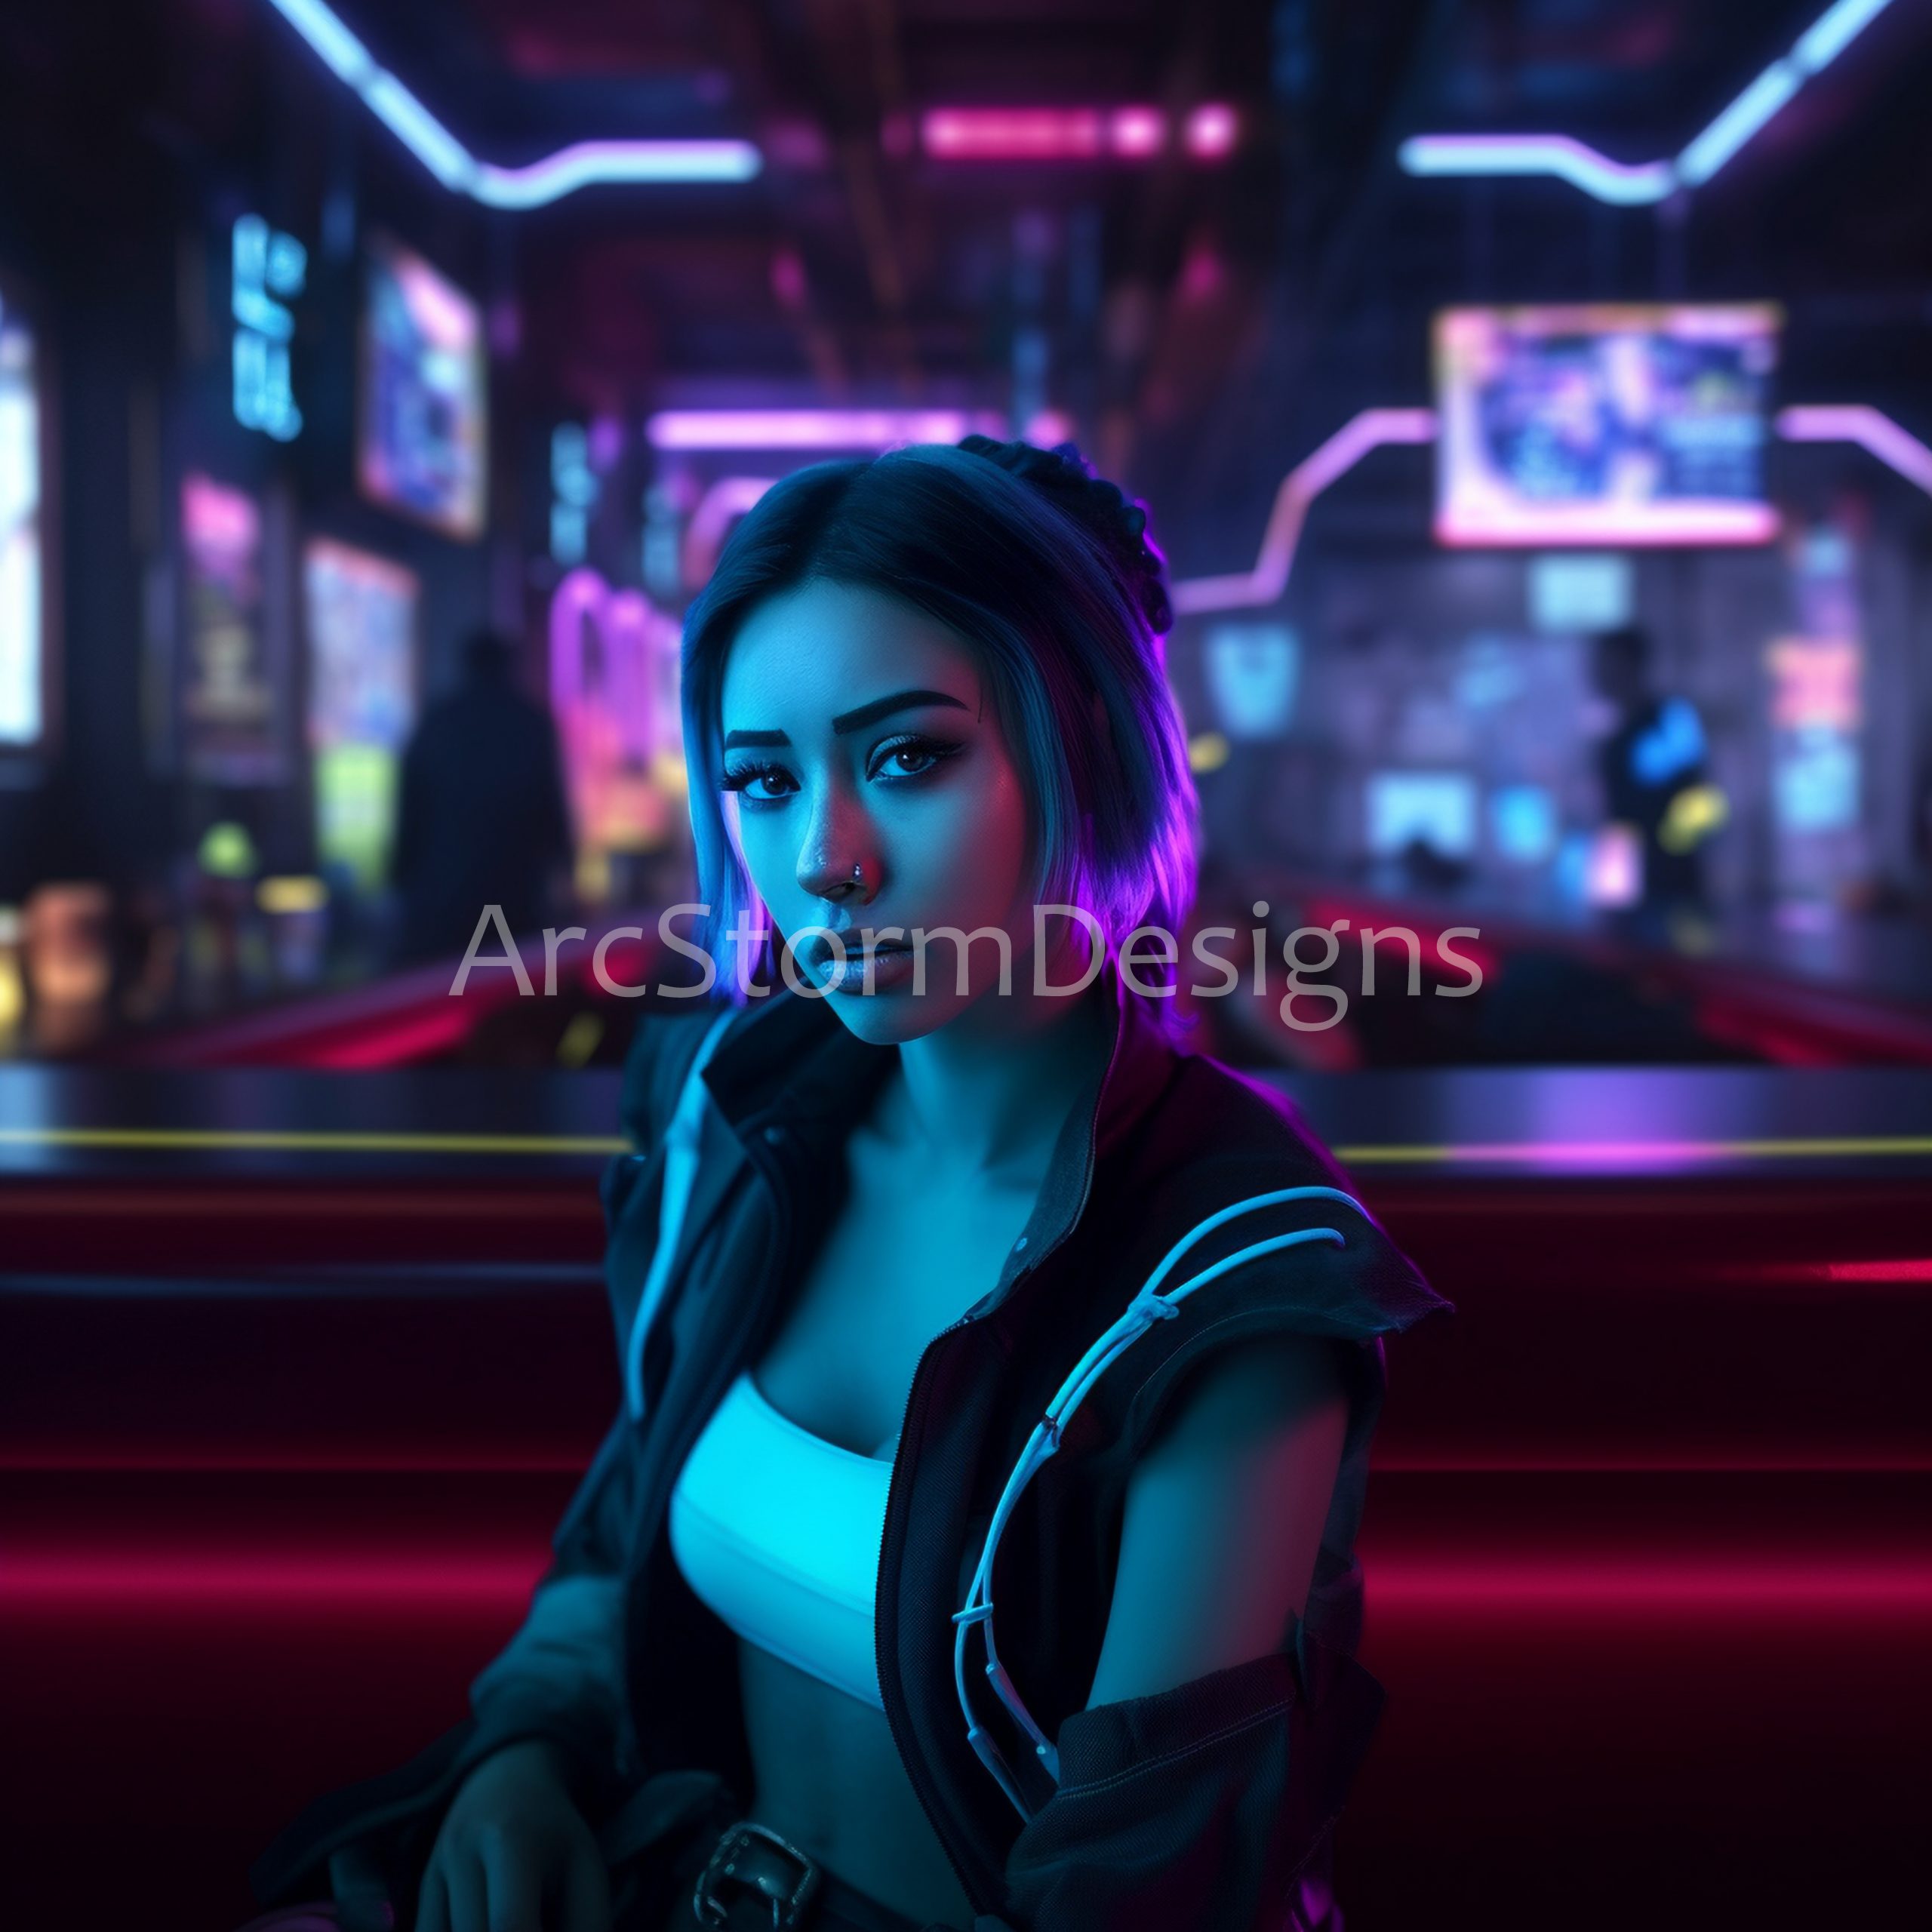 Electric Atmosphere: A Cyberpunk Woman's Night Out